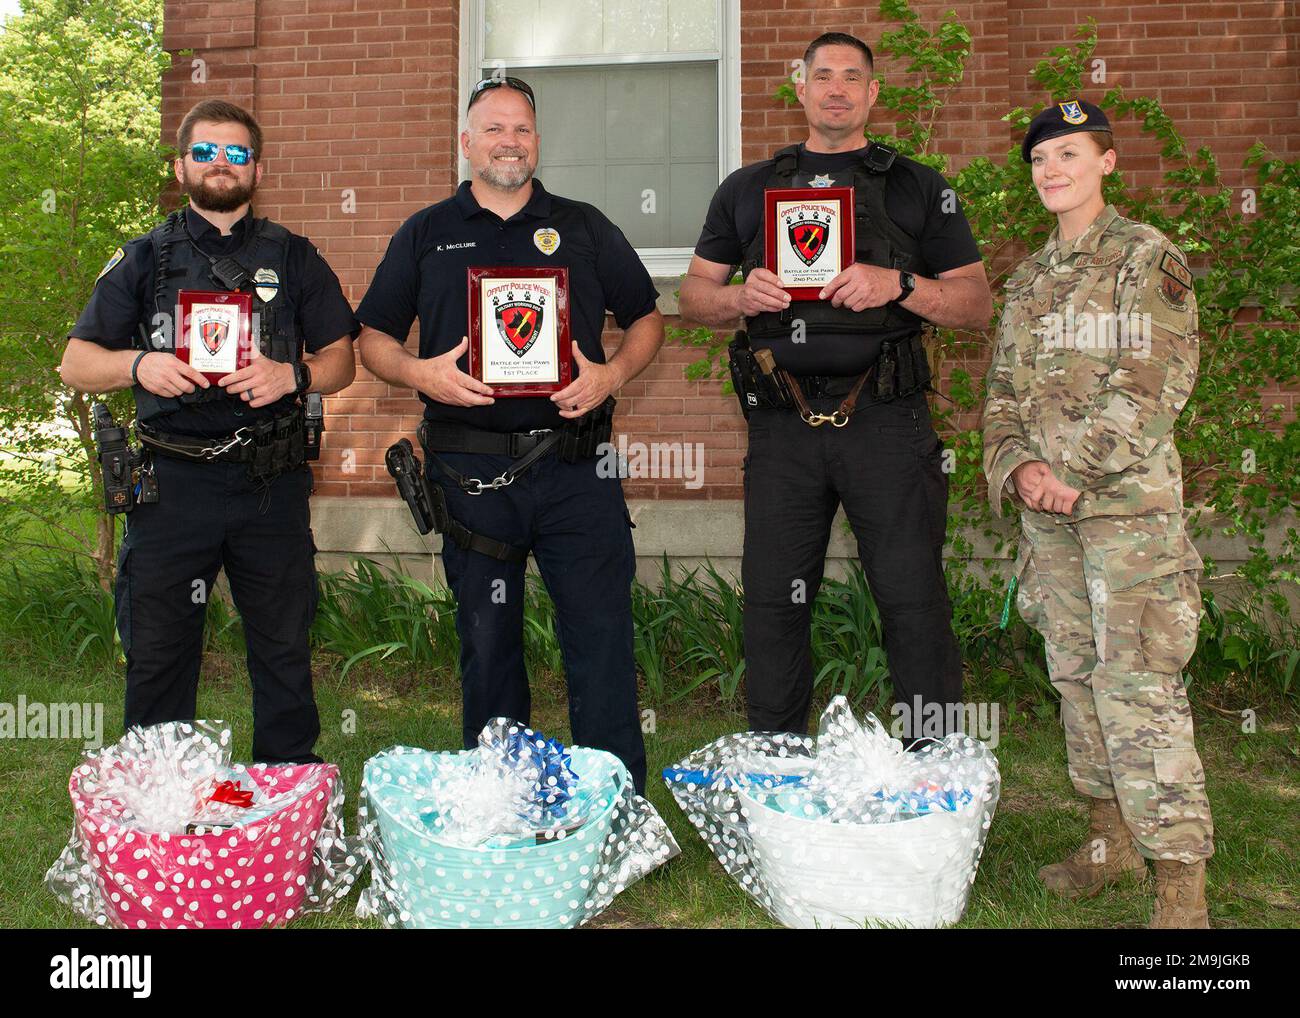 Winners of “Battle of the Paws” K-9 competition hosted by the 55th Security Forces Squadron pose for photograph at Offutt Air Force Base, Neb., May 19, 2022. (From left) Third place Officer Alex Klement, Council Bluffs Police Department, first place Officer Ken Mcclure, Council Bluffs Police Department, second place Officer Jay Weininger, Douglas County Sheriff’s Department, and Senior Airman Casi Smith, 55th Security Forces Squadron military working dog handler and competition coordinator. Stock Photo